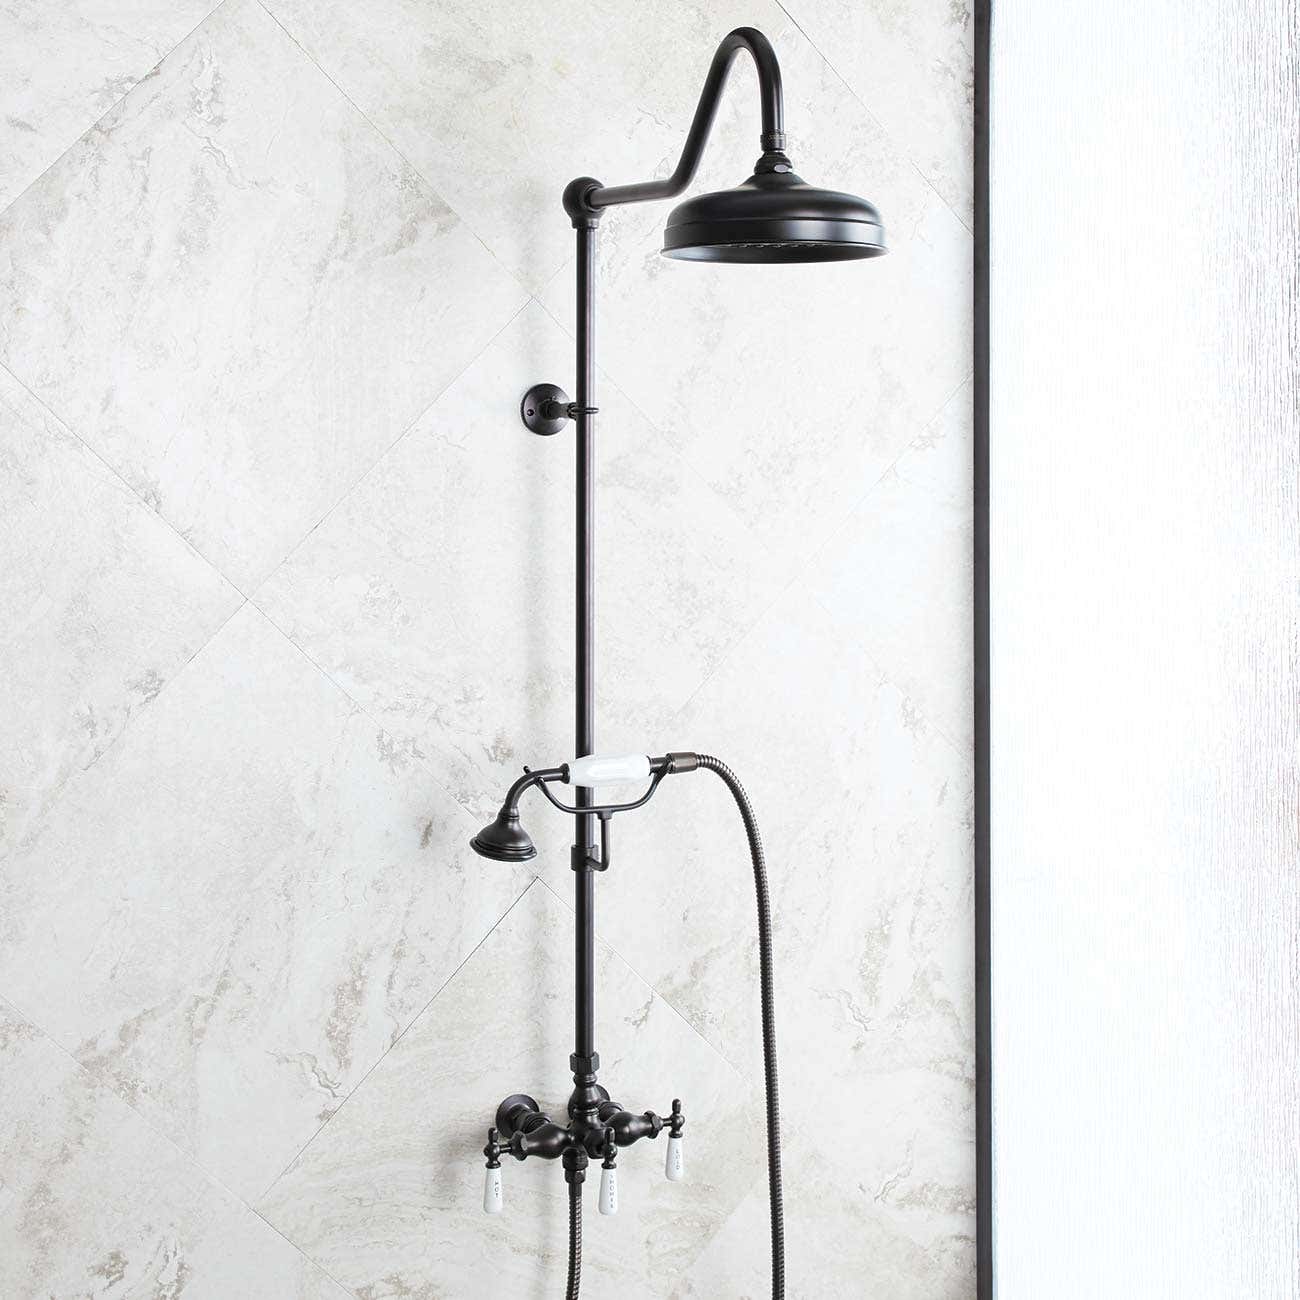 Exposed Pipe Shower Buying Guide